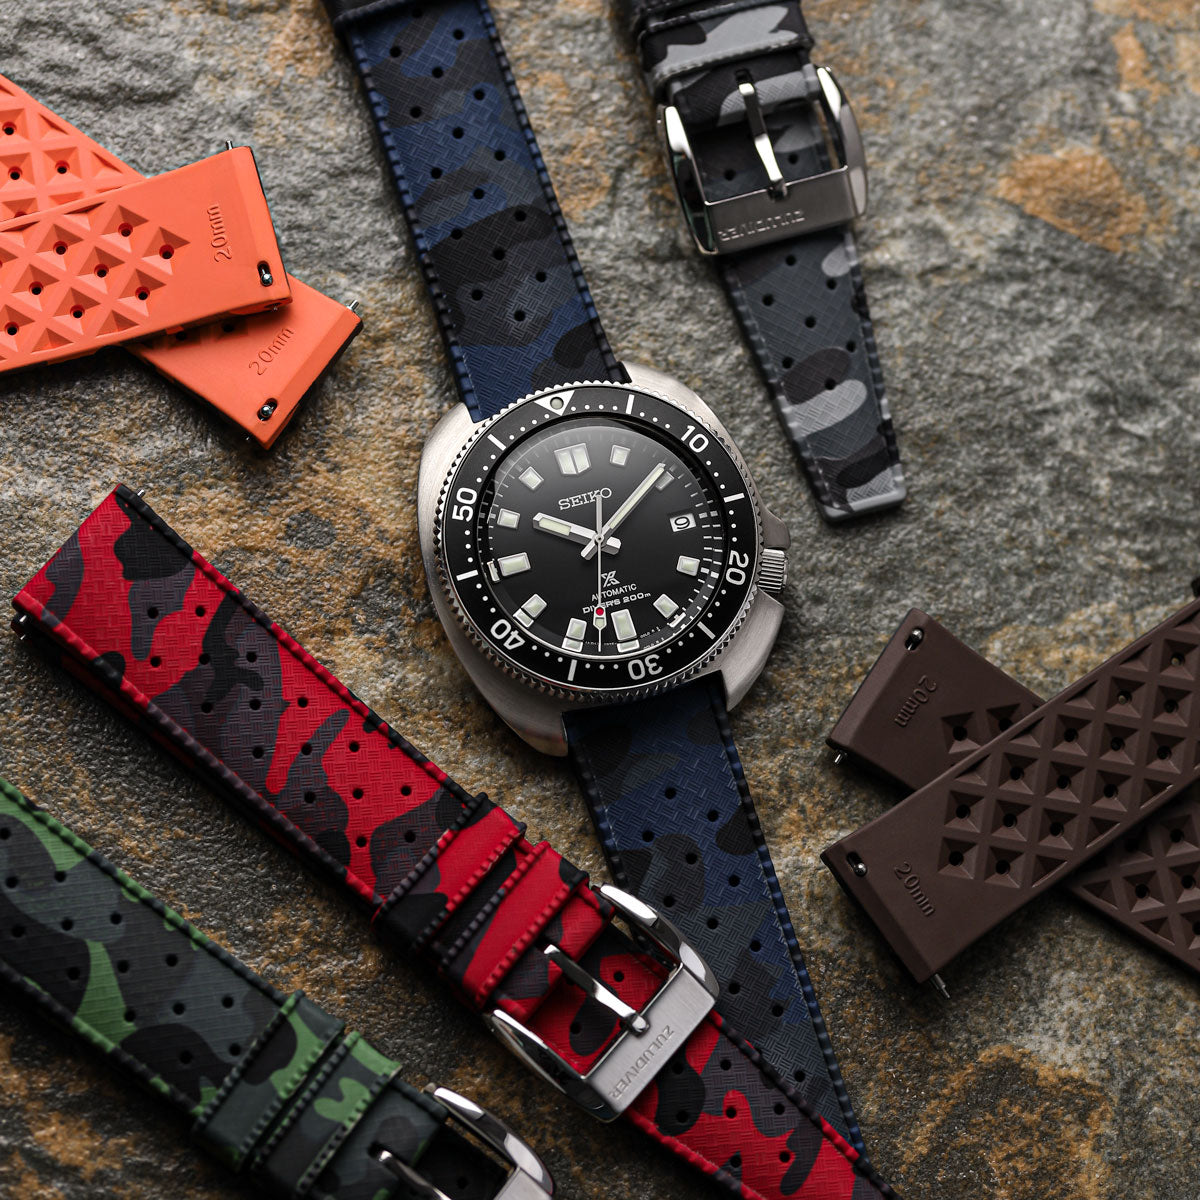 ZULUDIVER Tropical Style Camo Rubber Watch Strap - Orange - additional image 2